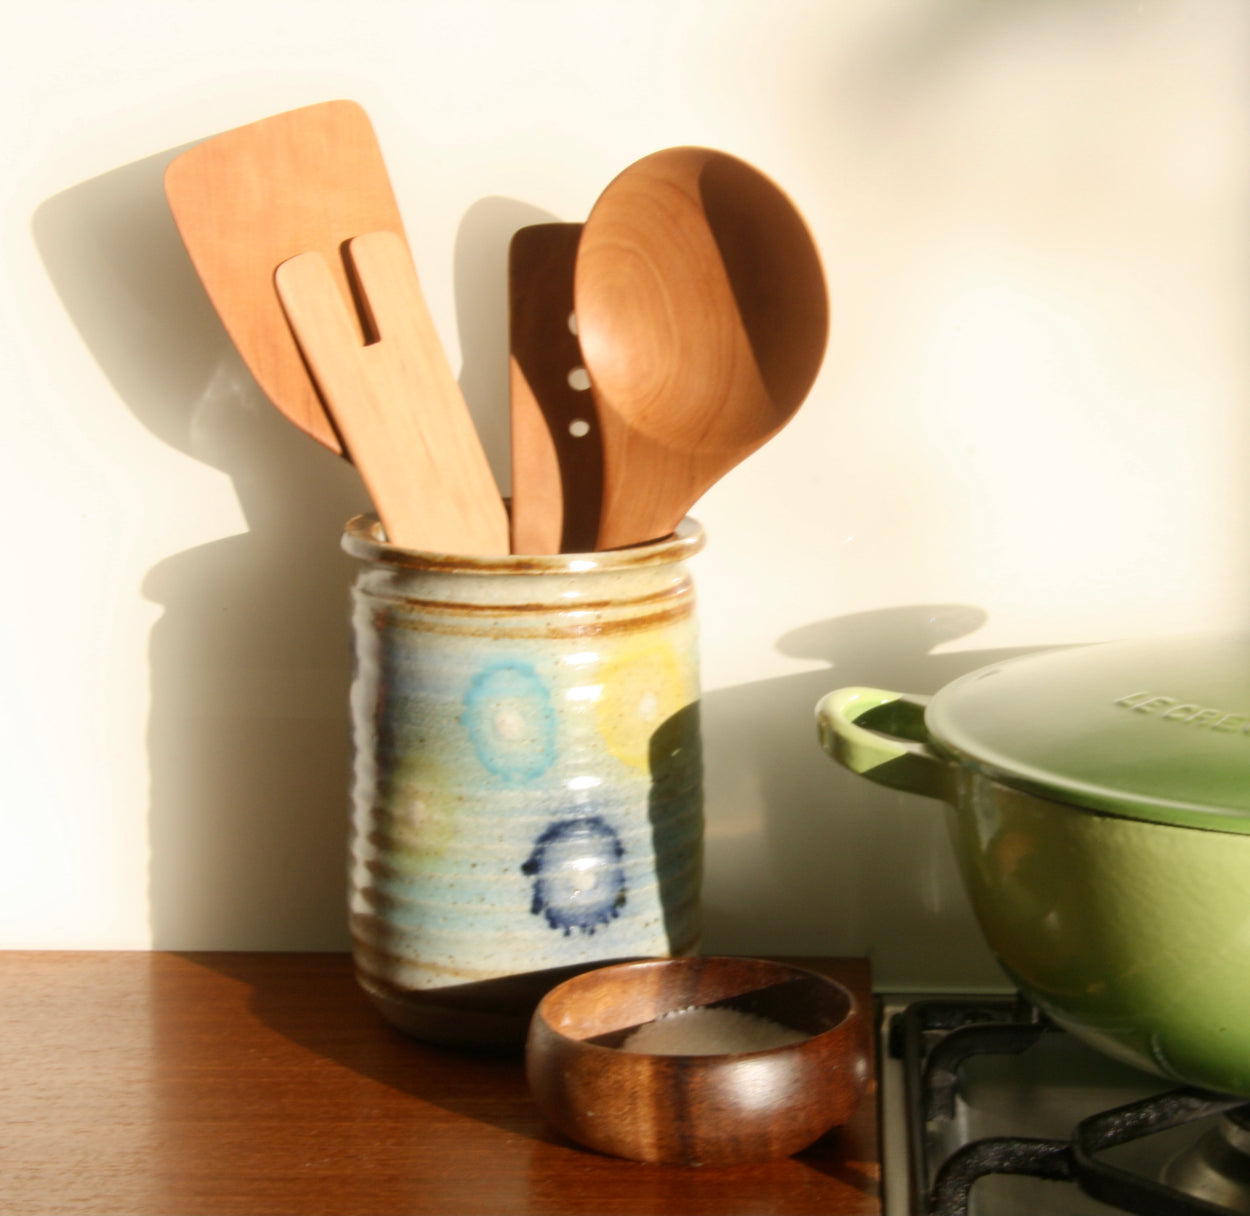 Handmade Pear Wood Salad Servers in ceramic jar with other kitchen utensils